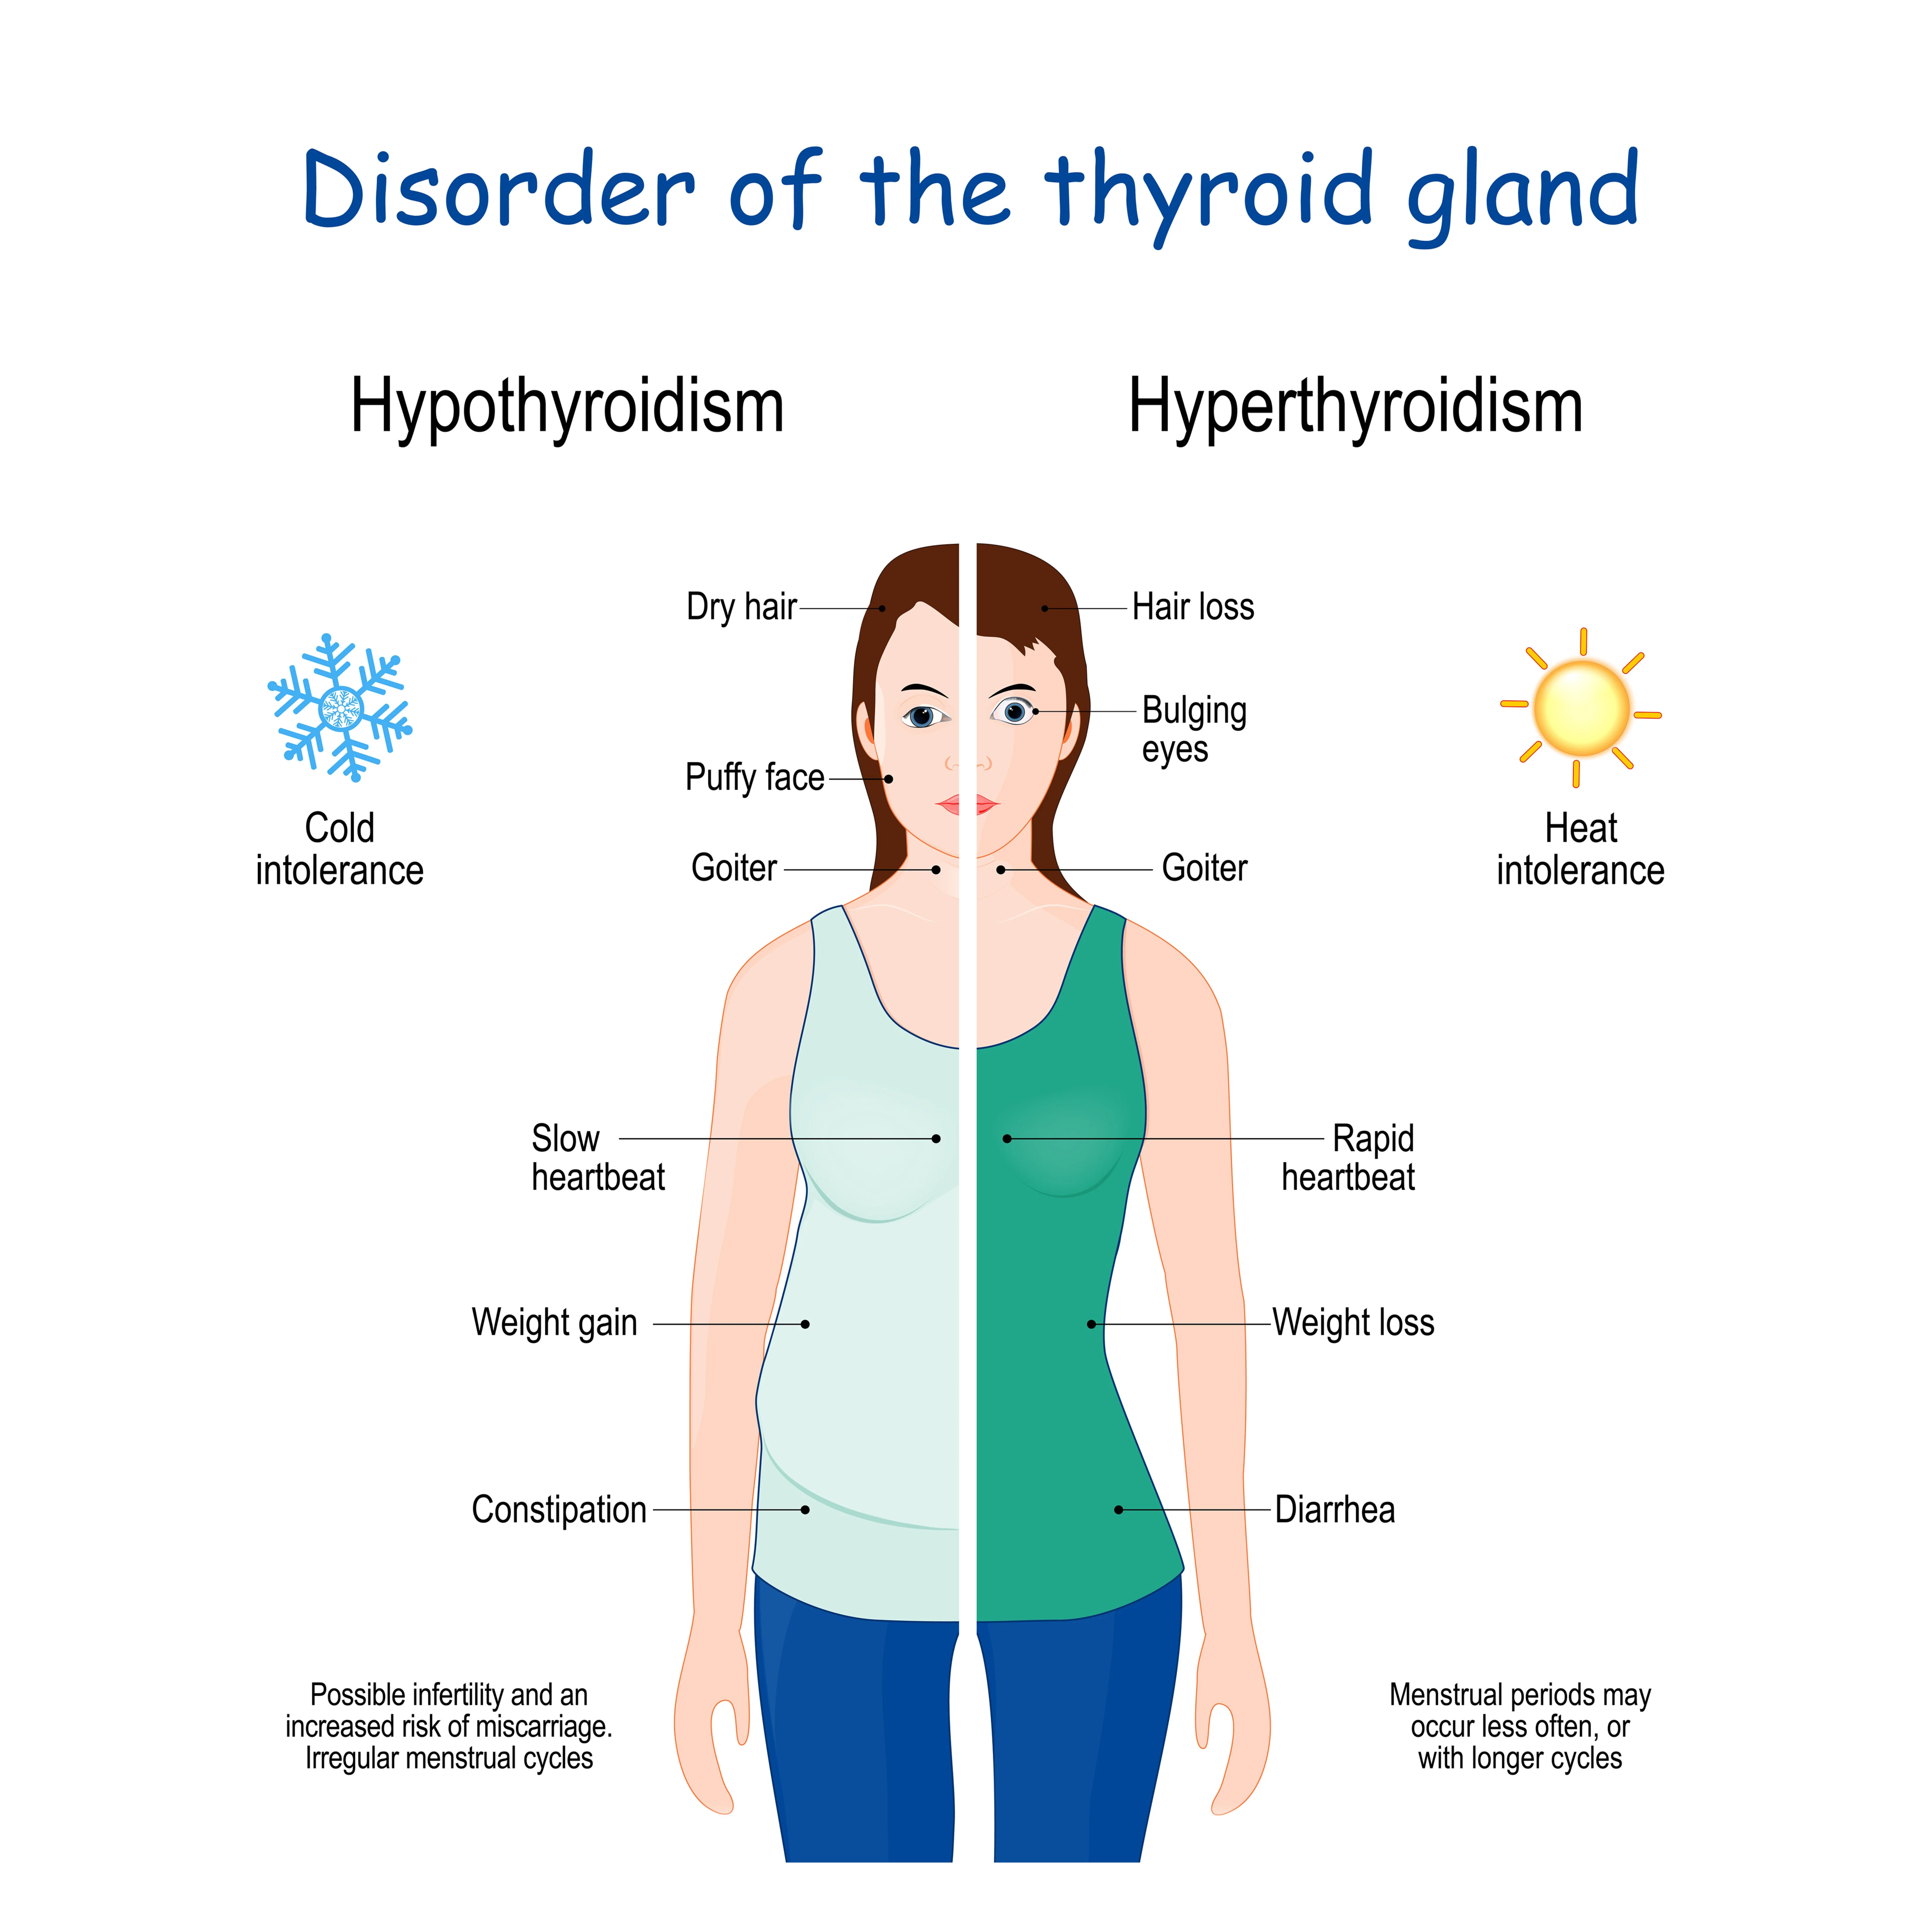 Thyroid disease can cause weight gain or loss, fatigue, feeling of anxiety, hair loss, and insomnia. In addition, it can cause significant reproductive issues by affecting ovulation. Thus, women with hormone disorders may not release an egg once a month during the menstrual cycle, which makes it difficult to conceive.